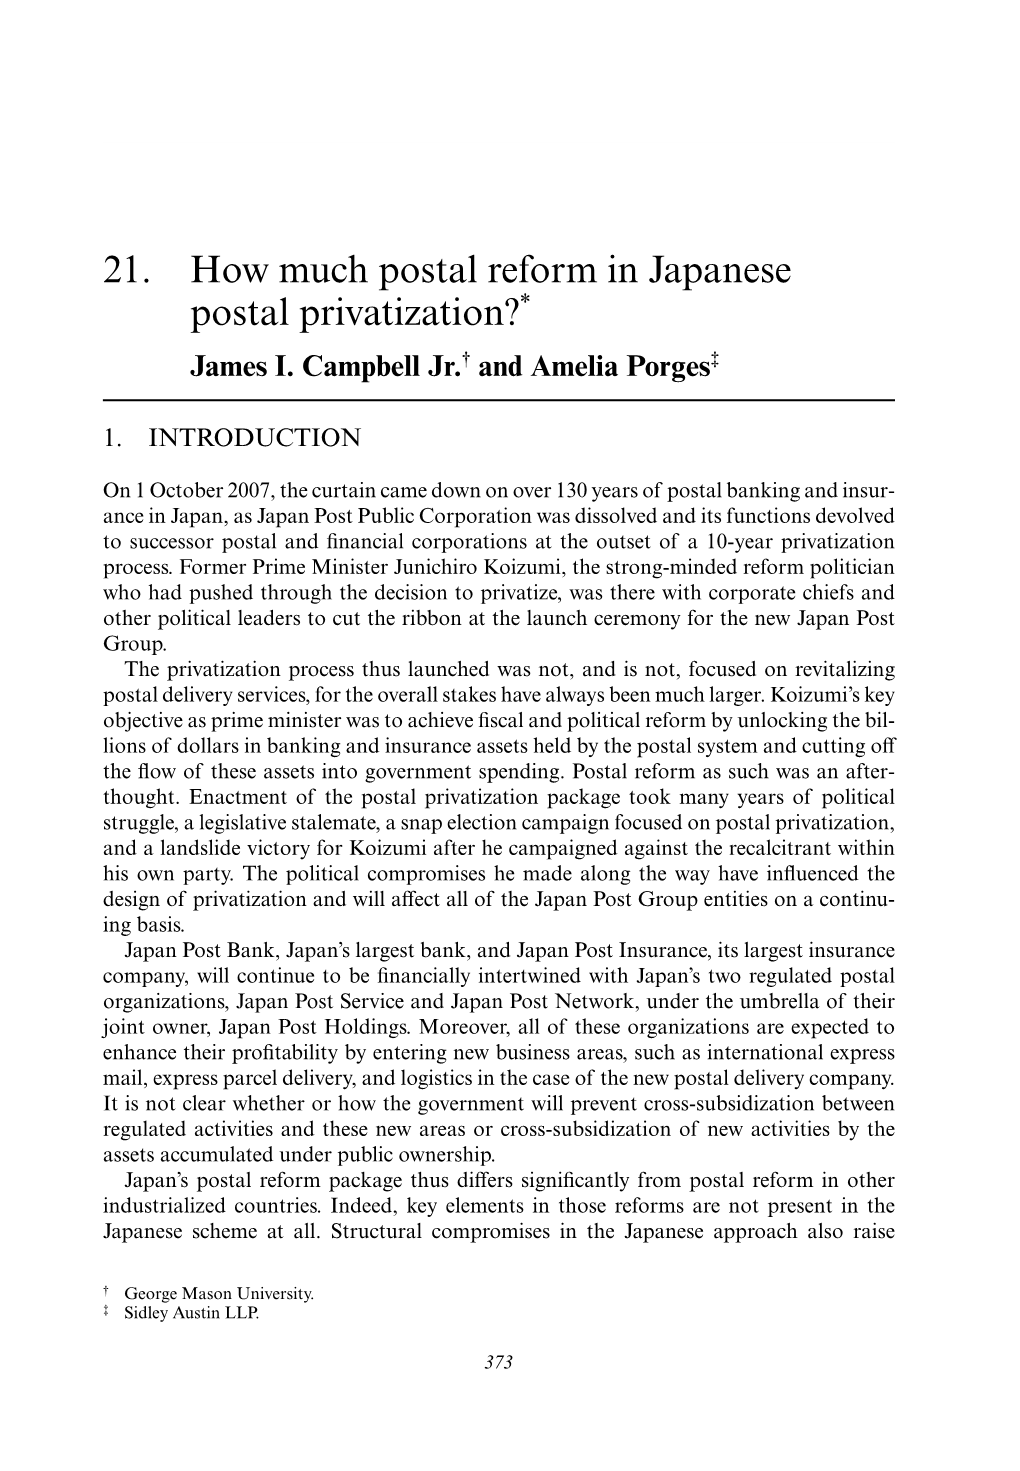 How Much Postal Reform in Japanese Postal Privatization?* James I